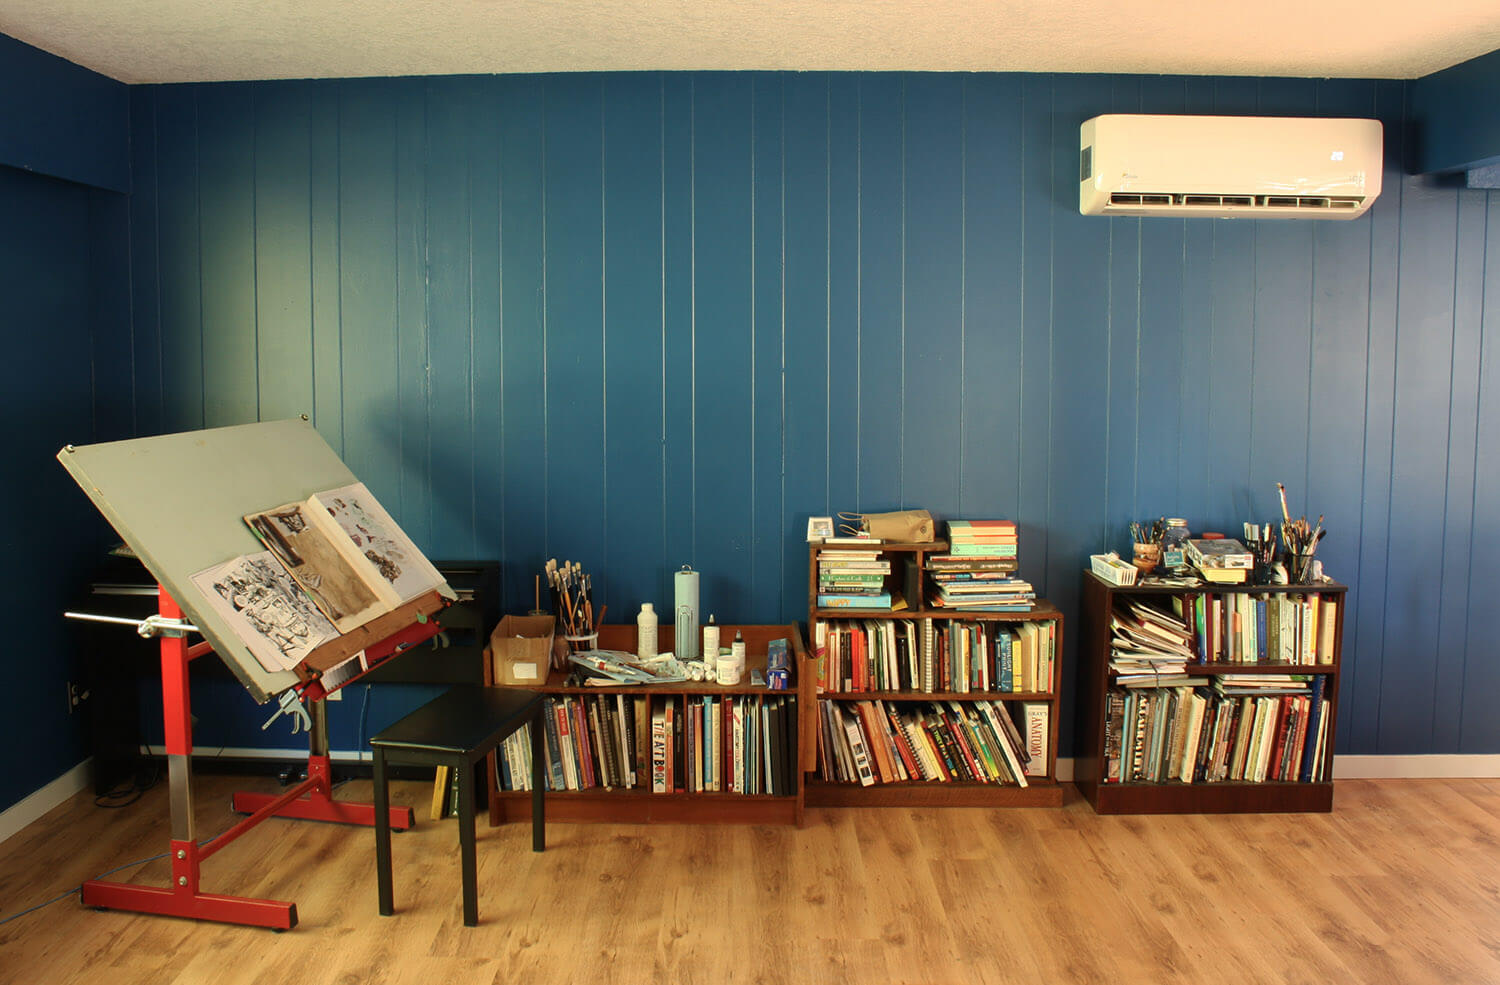 Living room wall painted blue